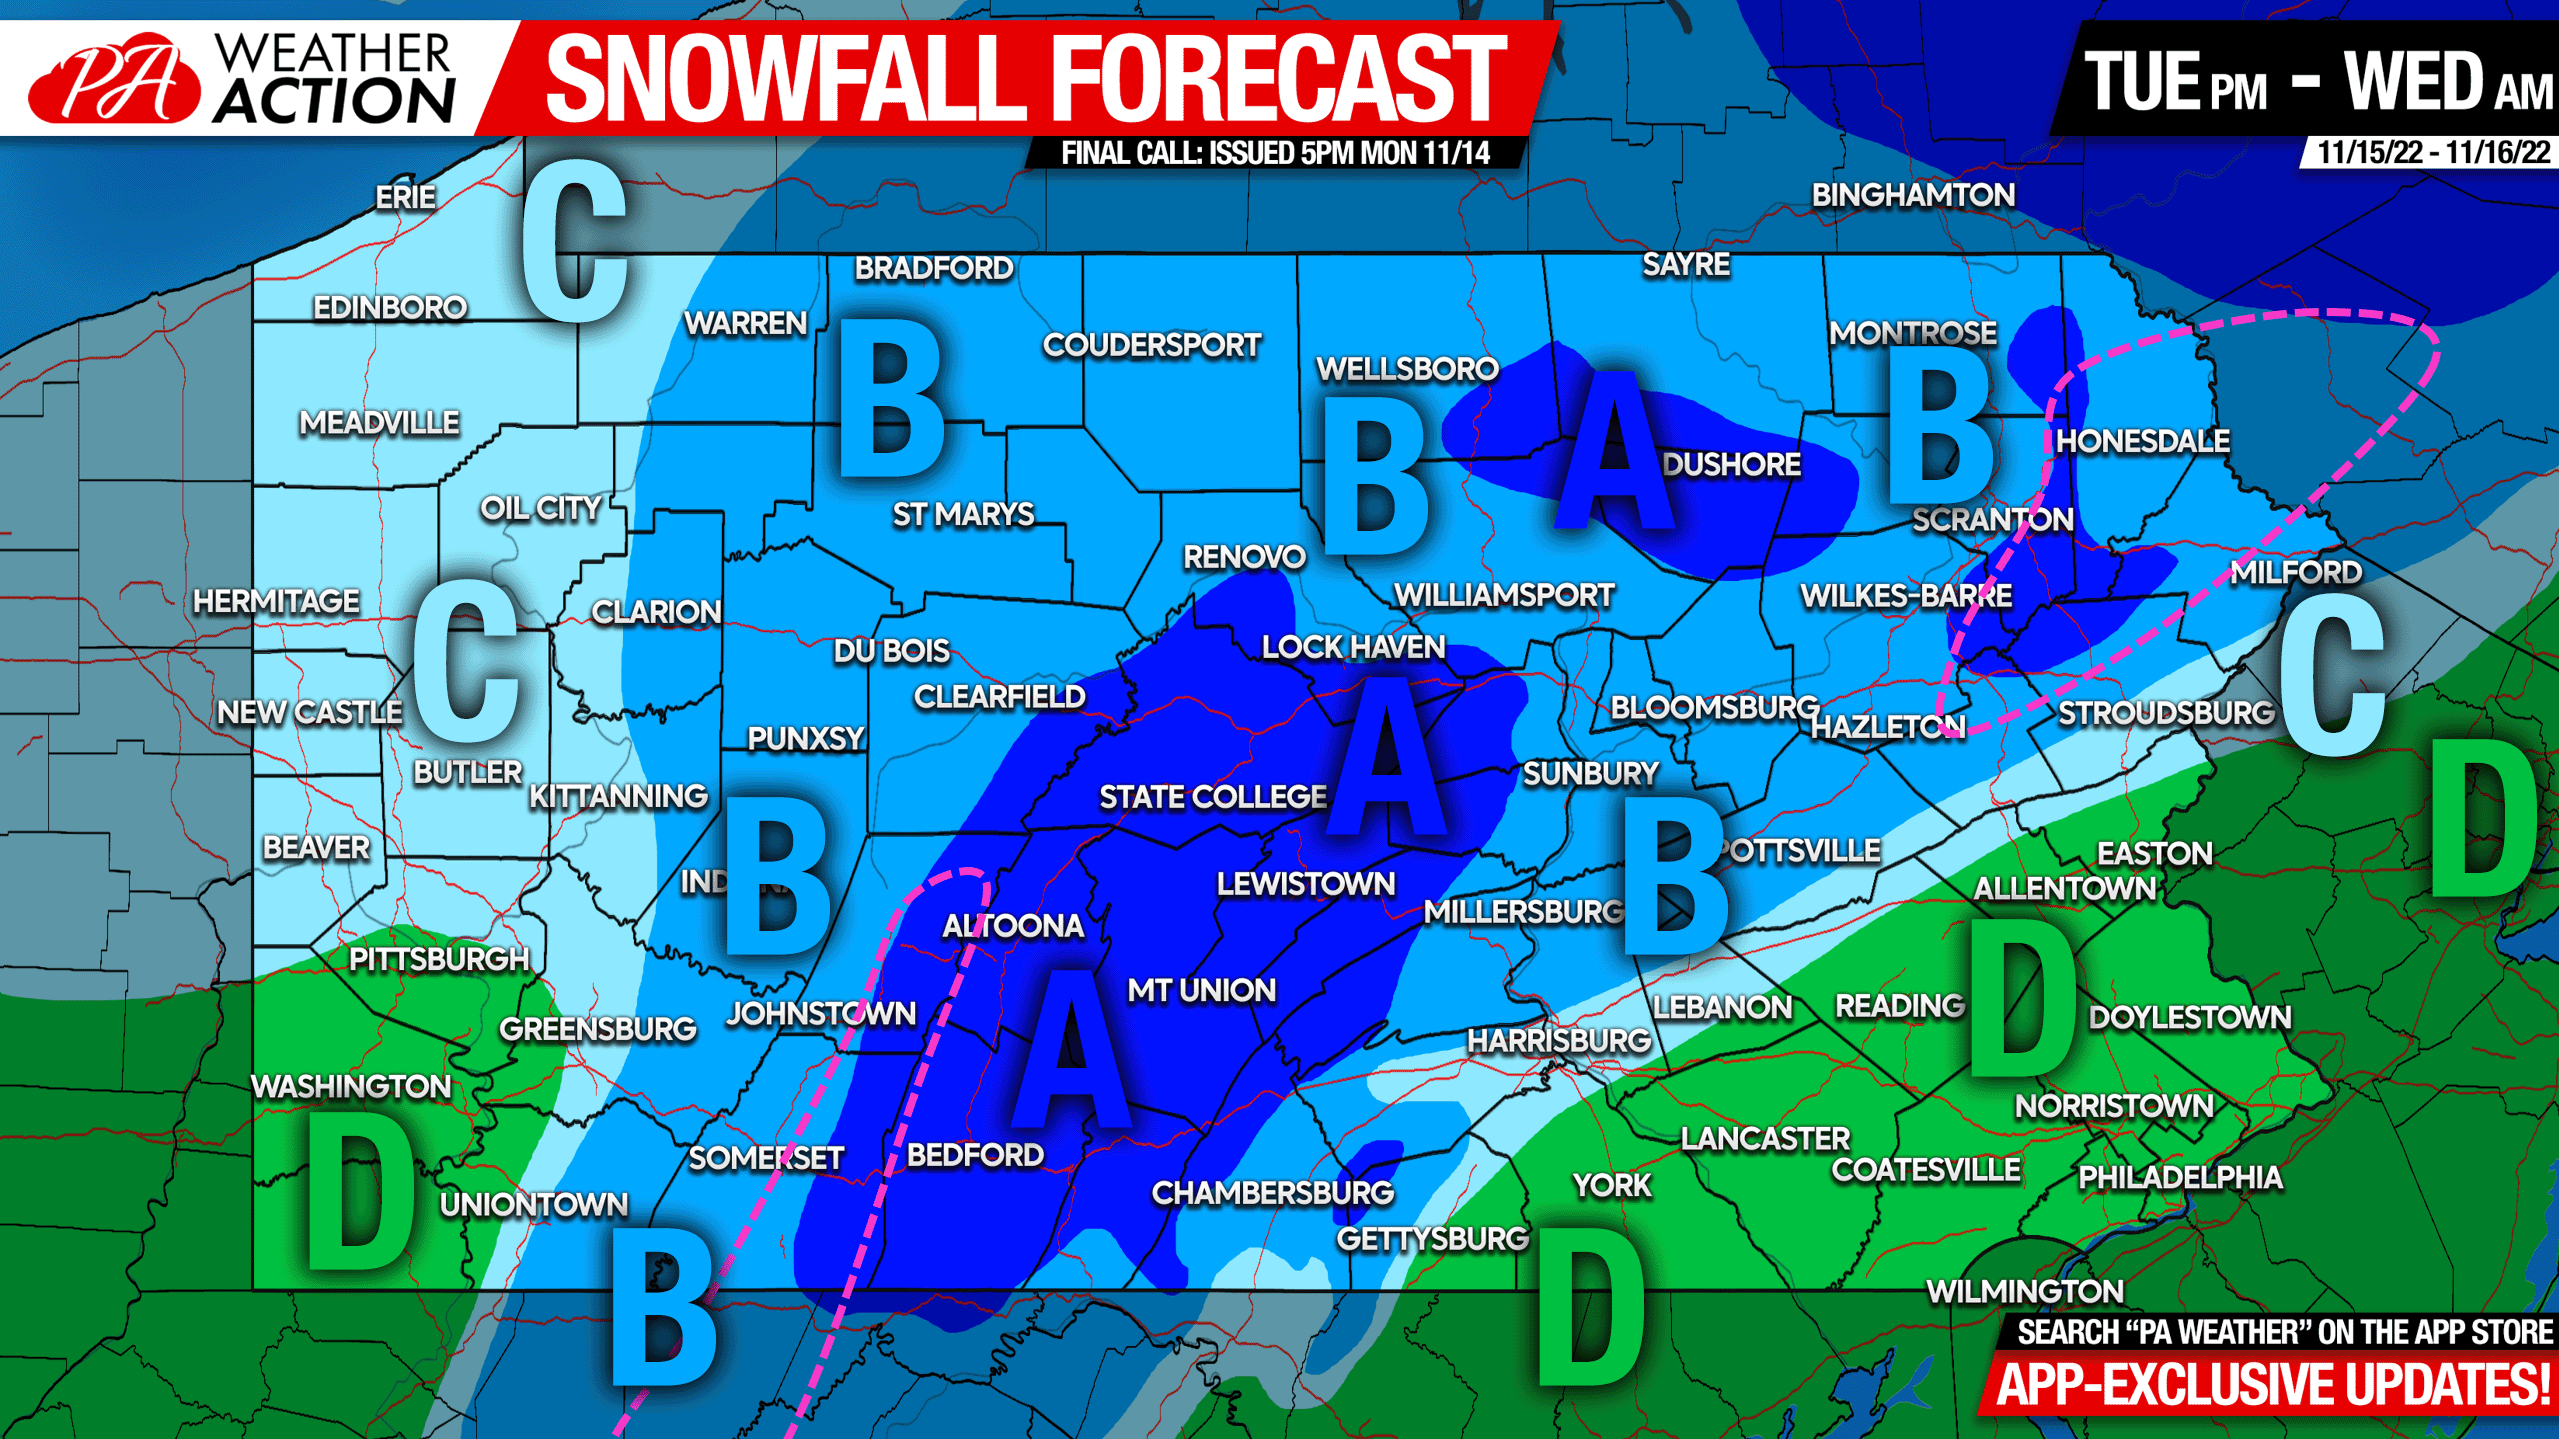 Final Call Snowfall Forecast for Tuesday's Winter Storm; Amounts Increased in Some Areas